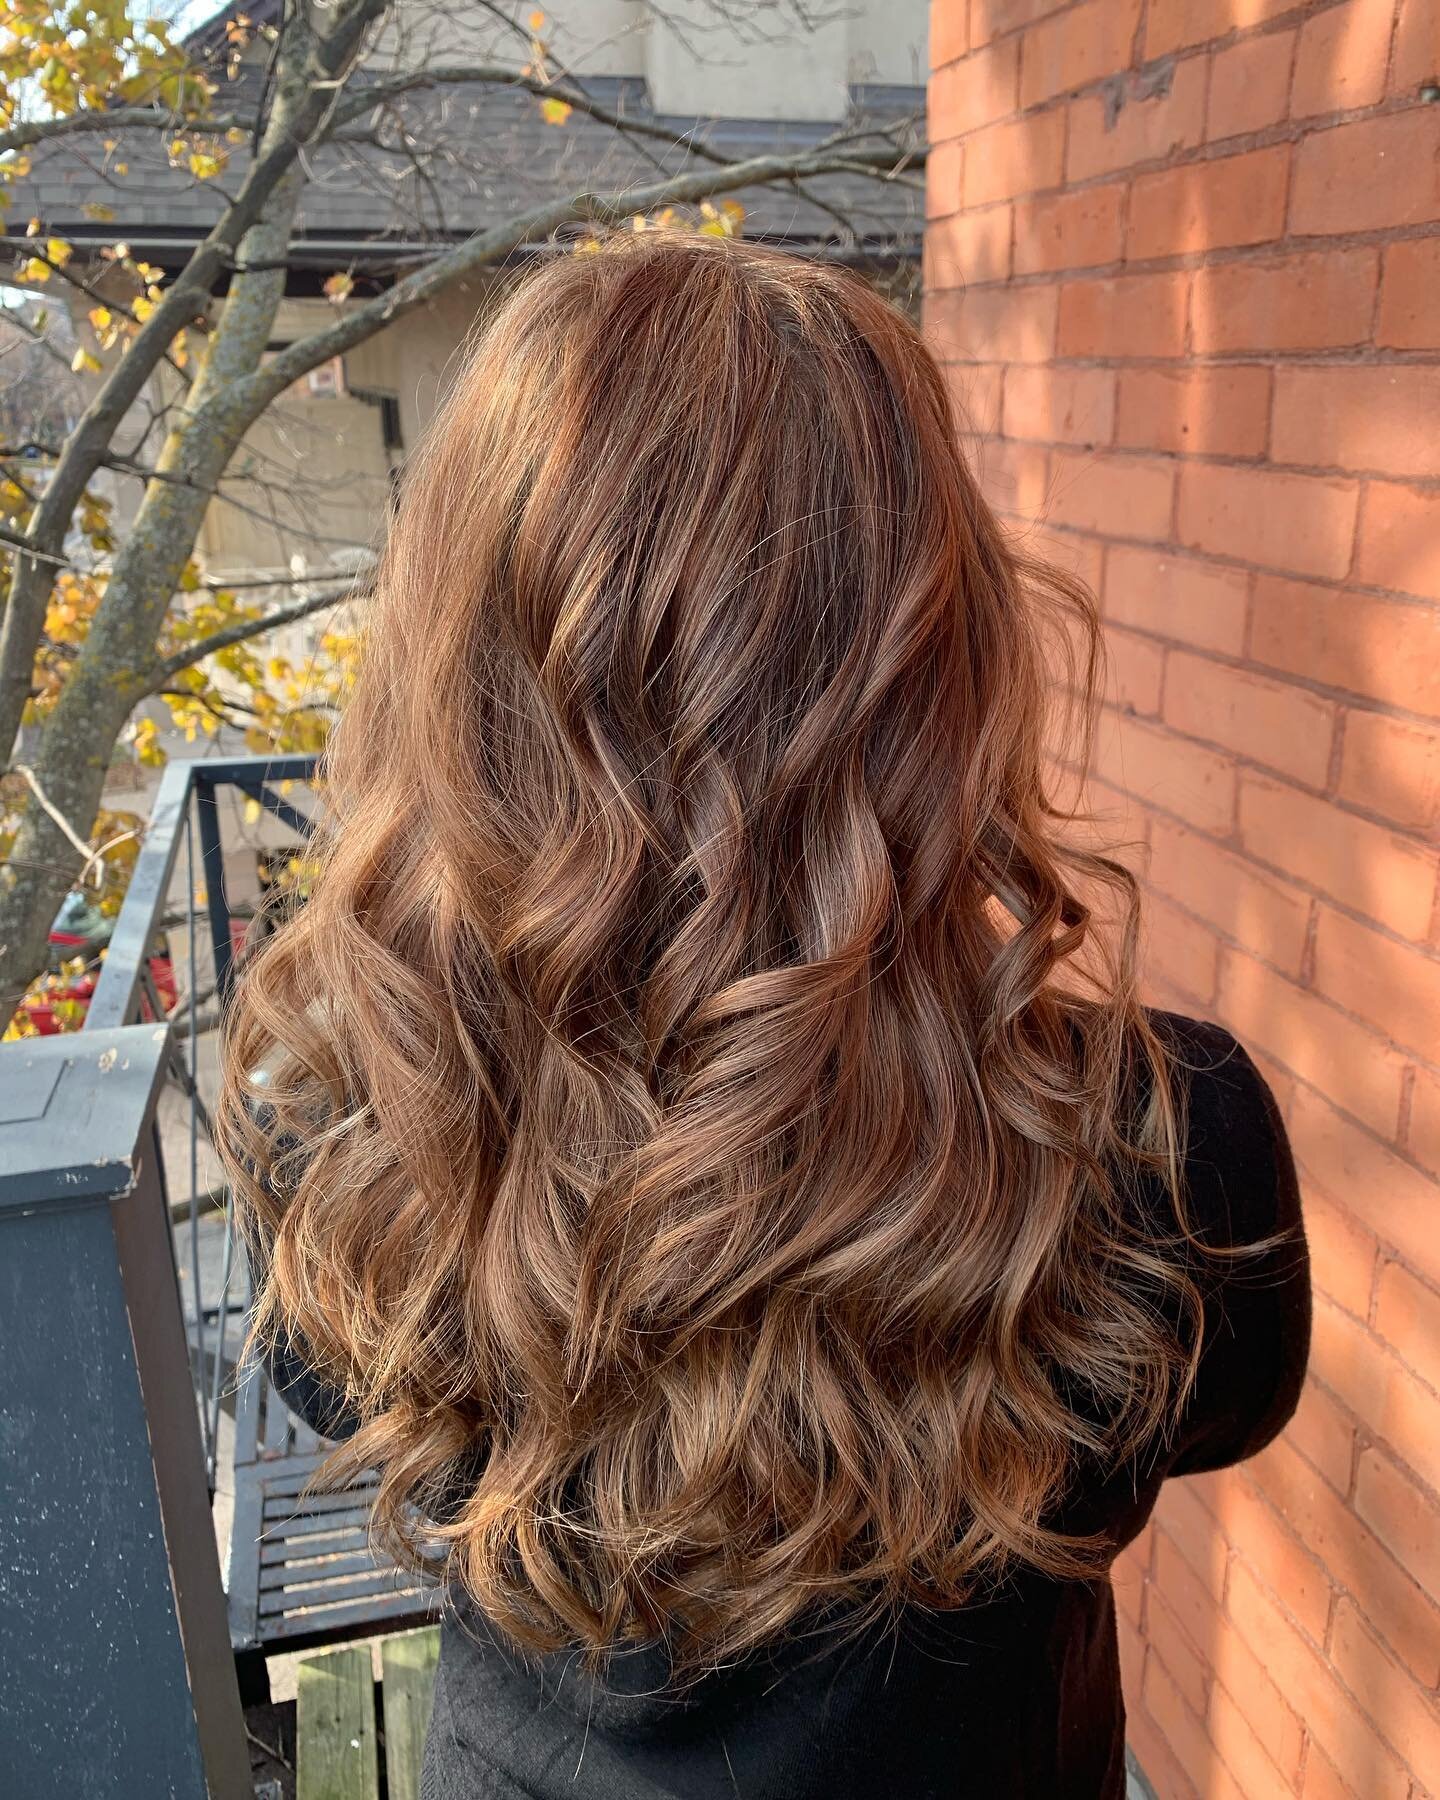 Full head of highlights and lowlights for fresh fall hair 🍂